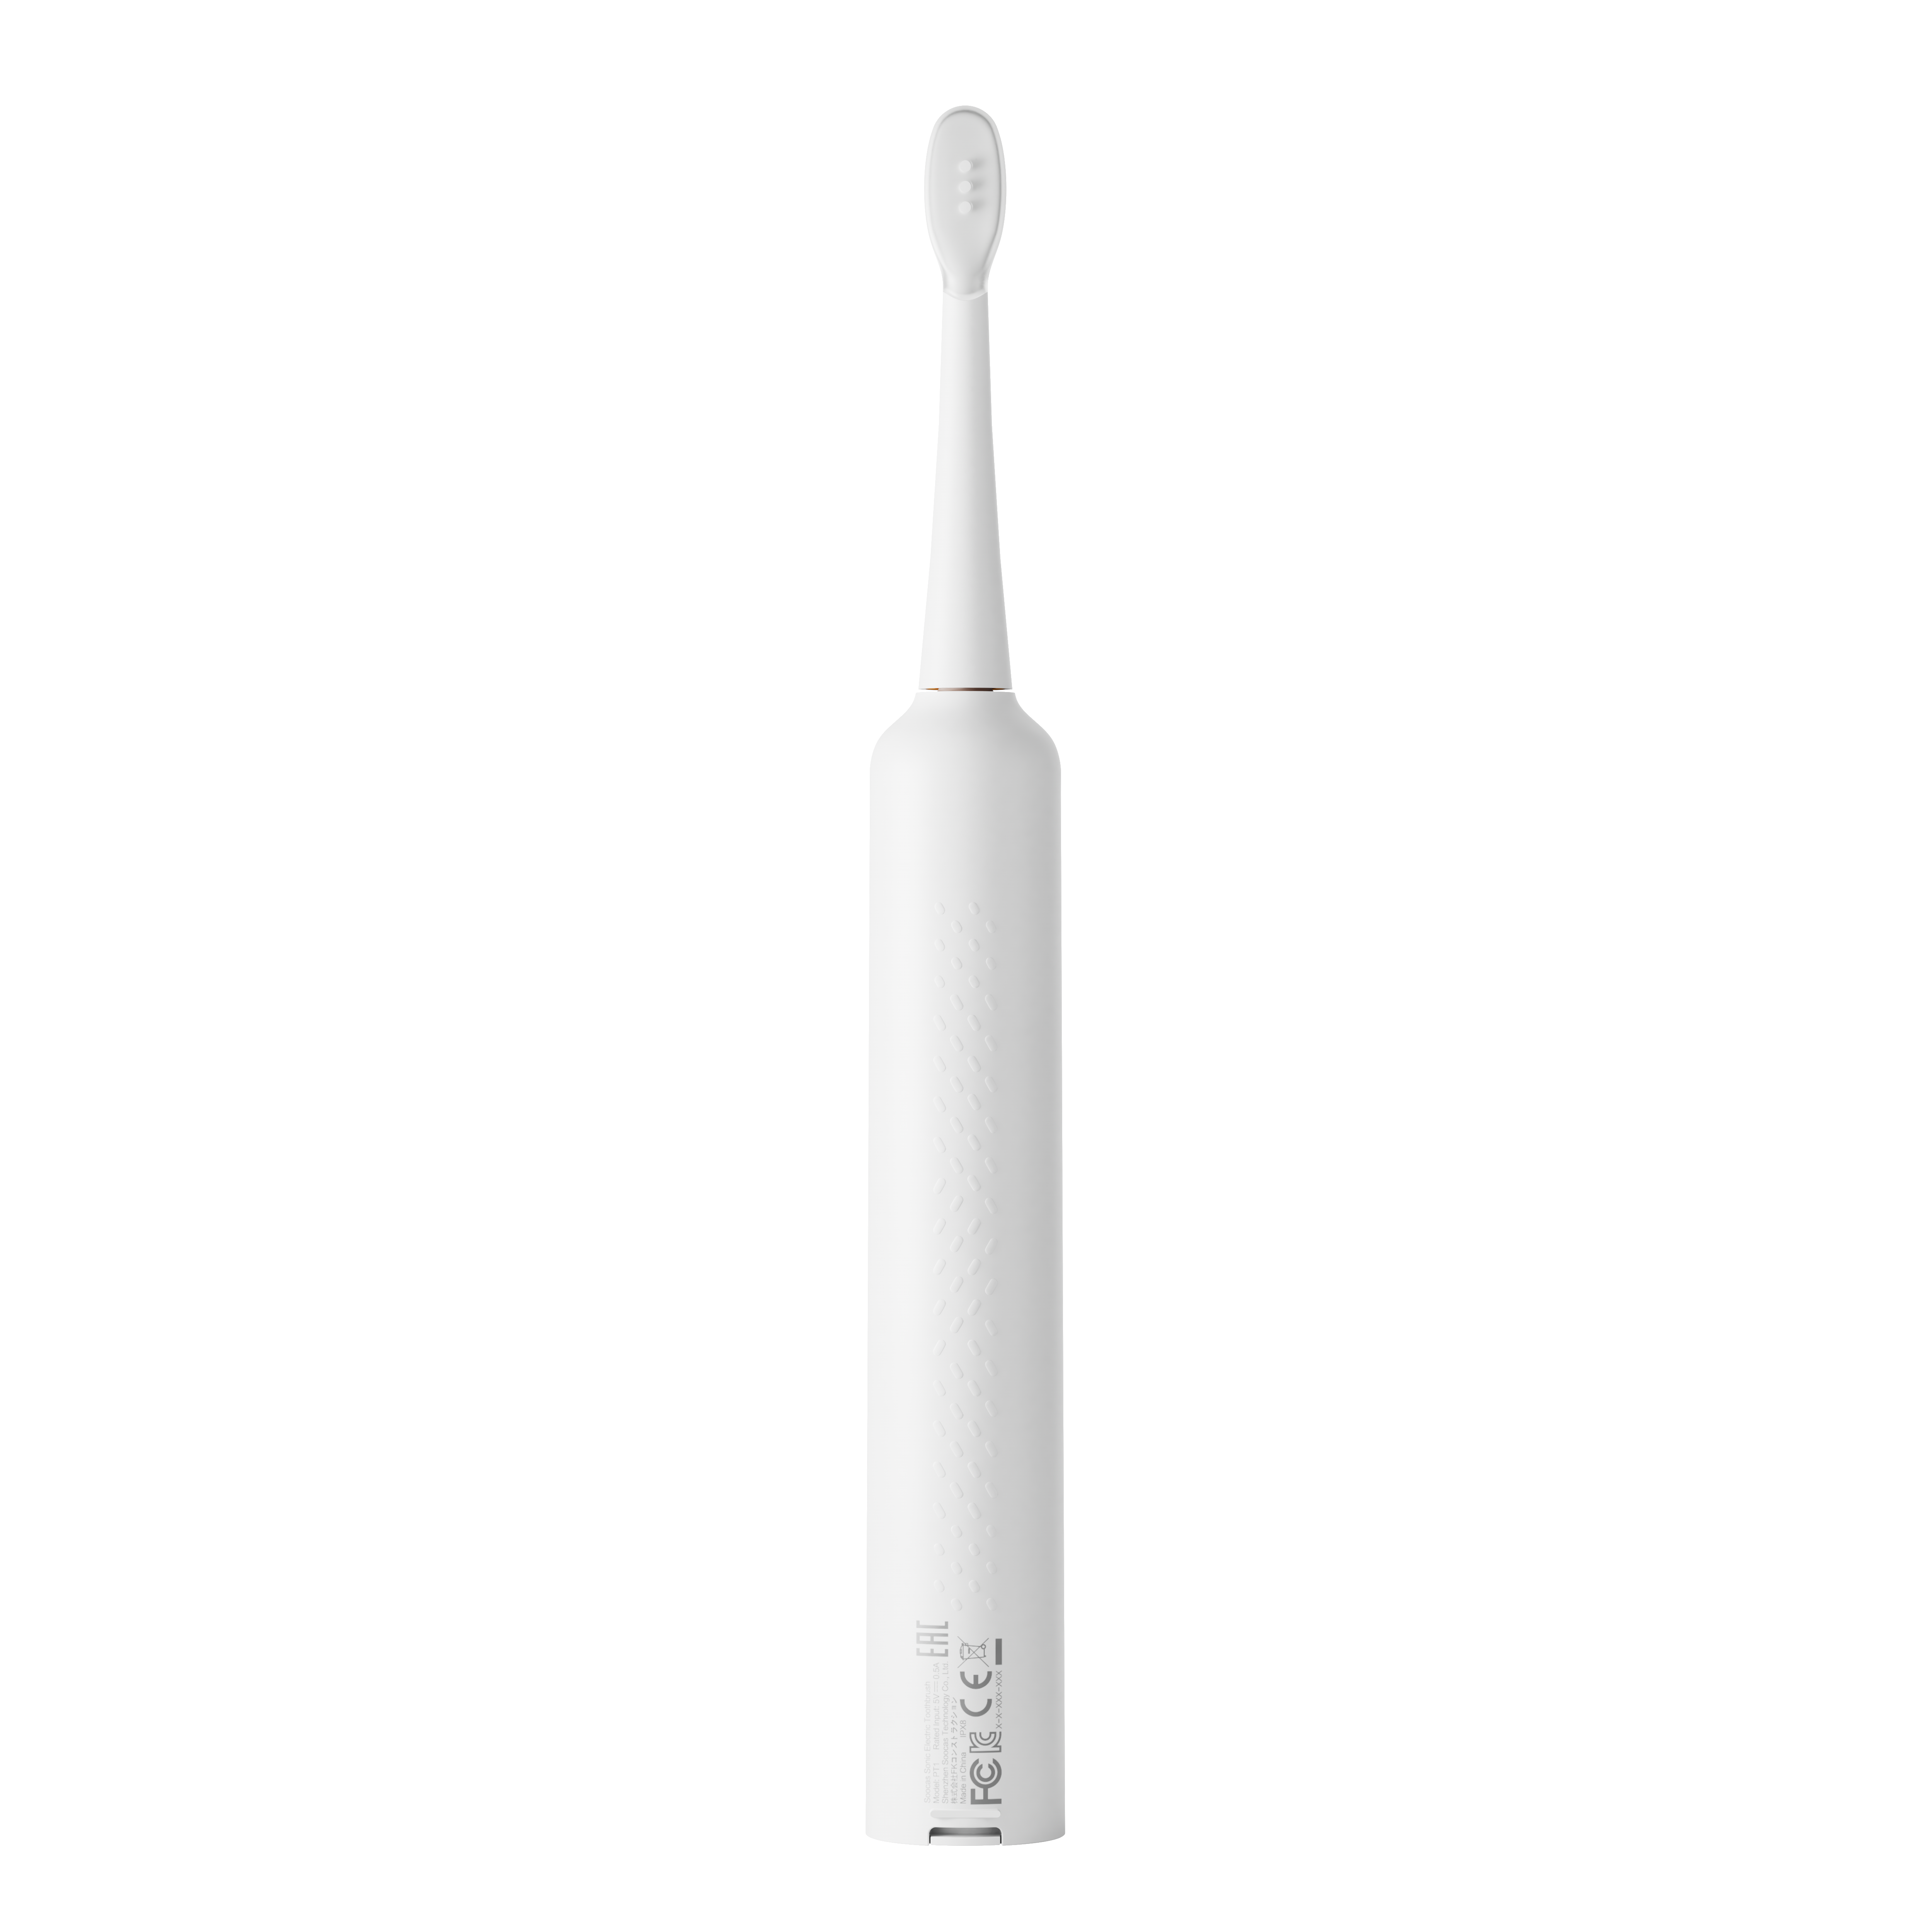 Soocas Aura Electric Toothbrush, One Charge Last One Year